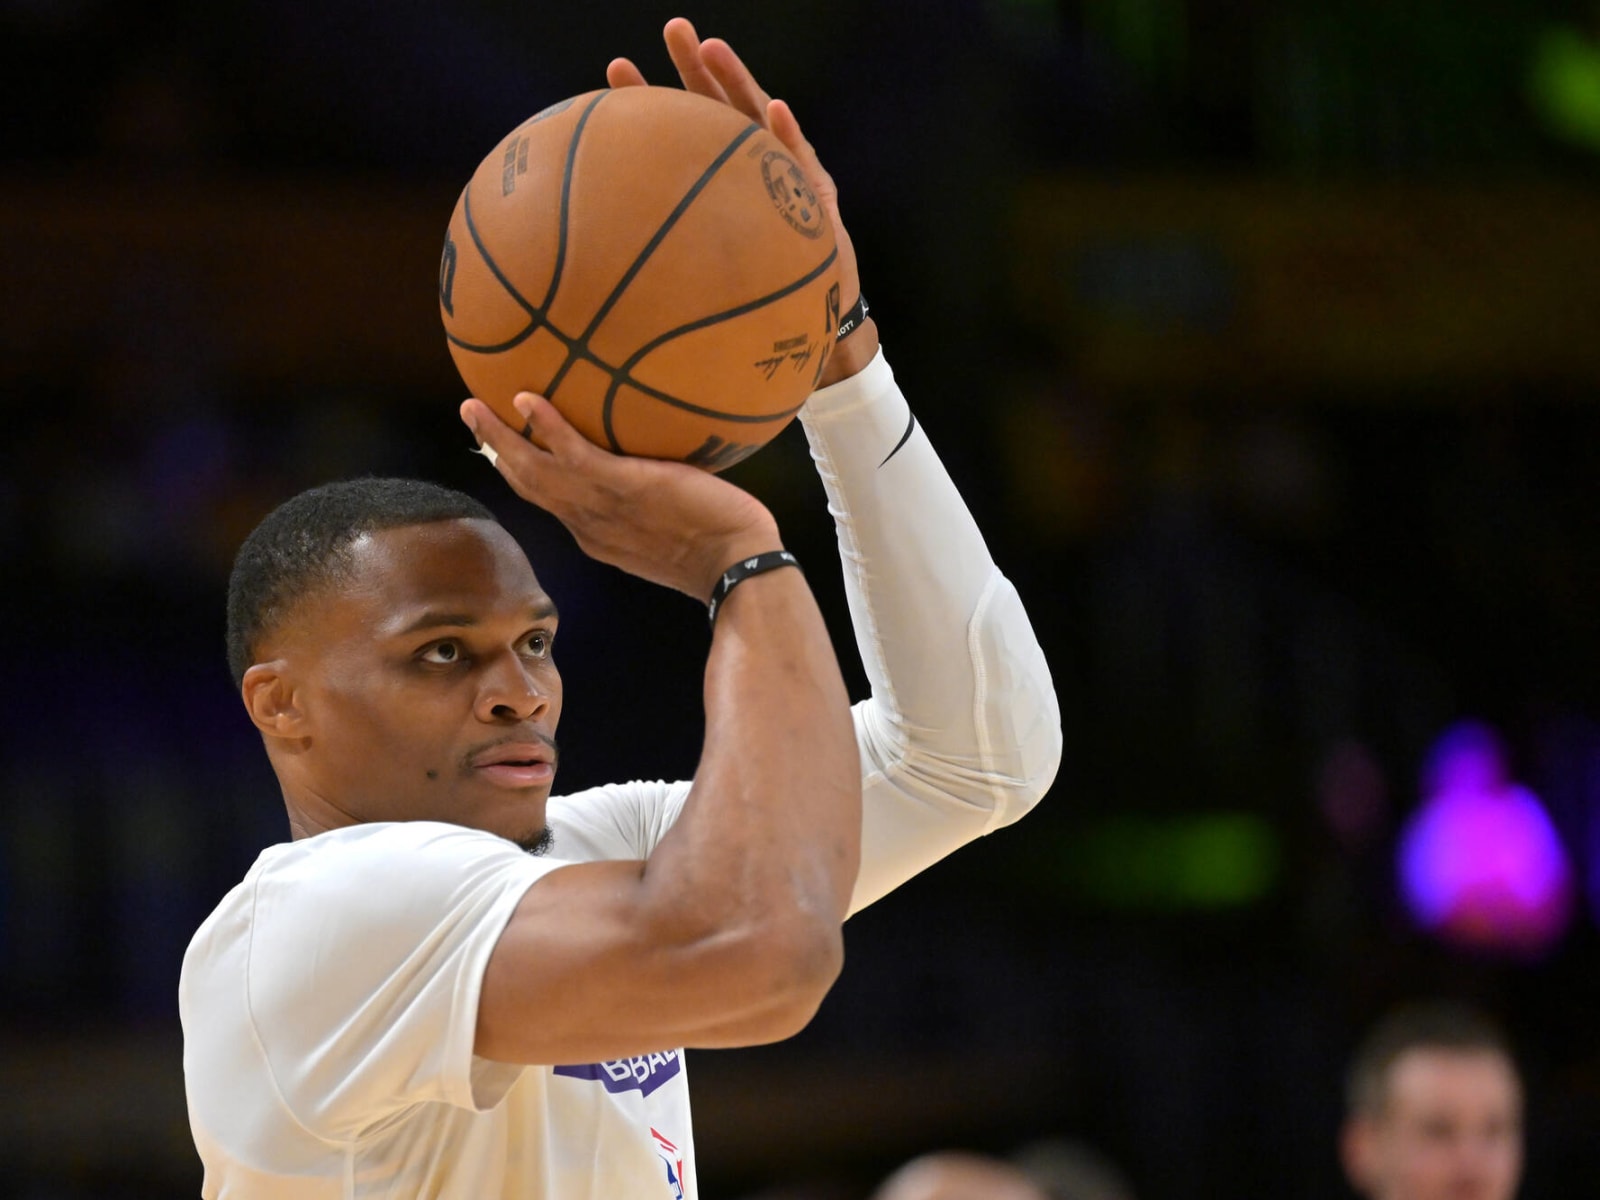 WATCH: Lakers' Russell Westbrook throws first pitch at Dodgers game